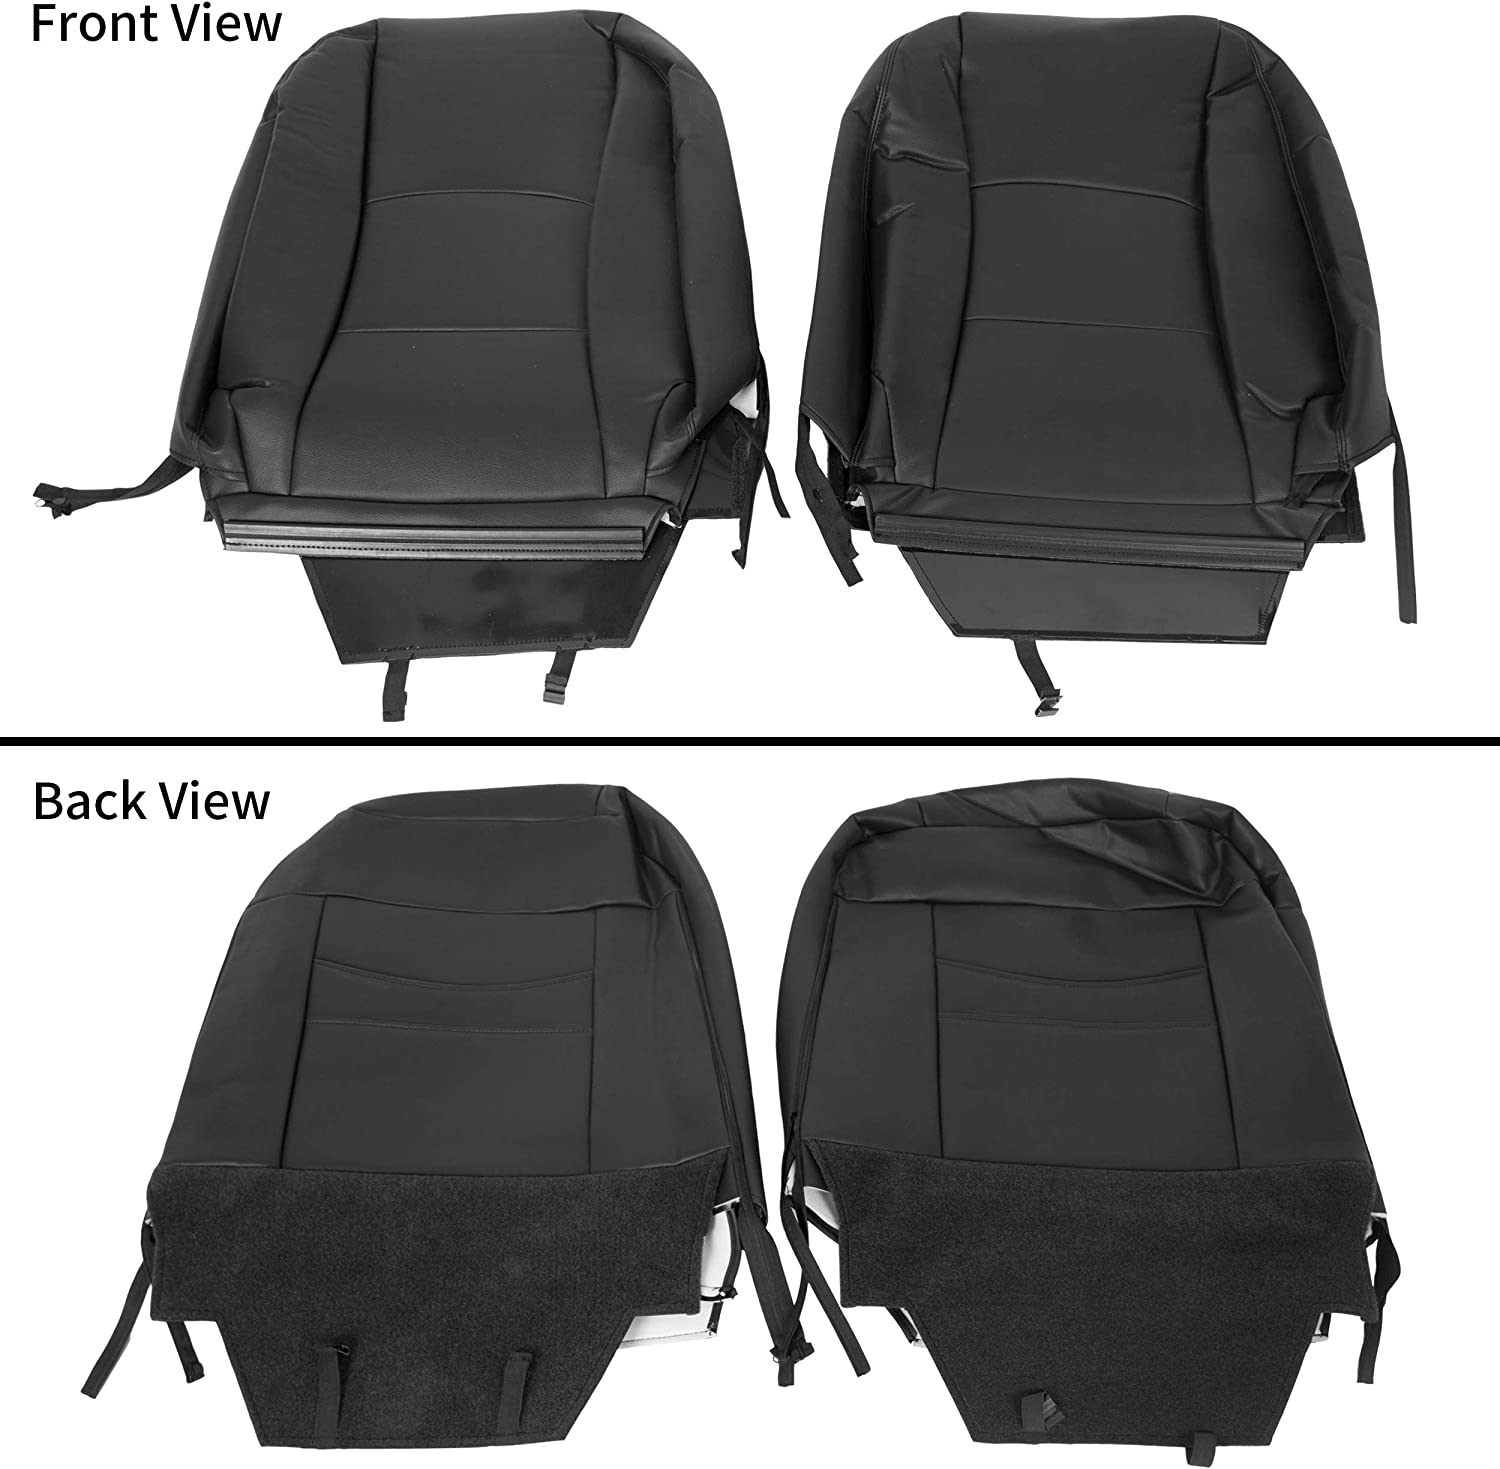 KOJEM Seat Covers Replacements for 2013-2018 14 15 16 17 Dodge Ram Crew Cab  1500/2500/3500 Artificial Leather Black